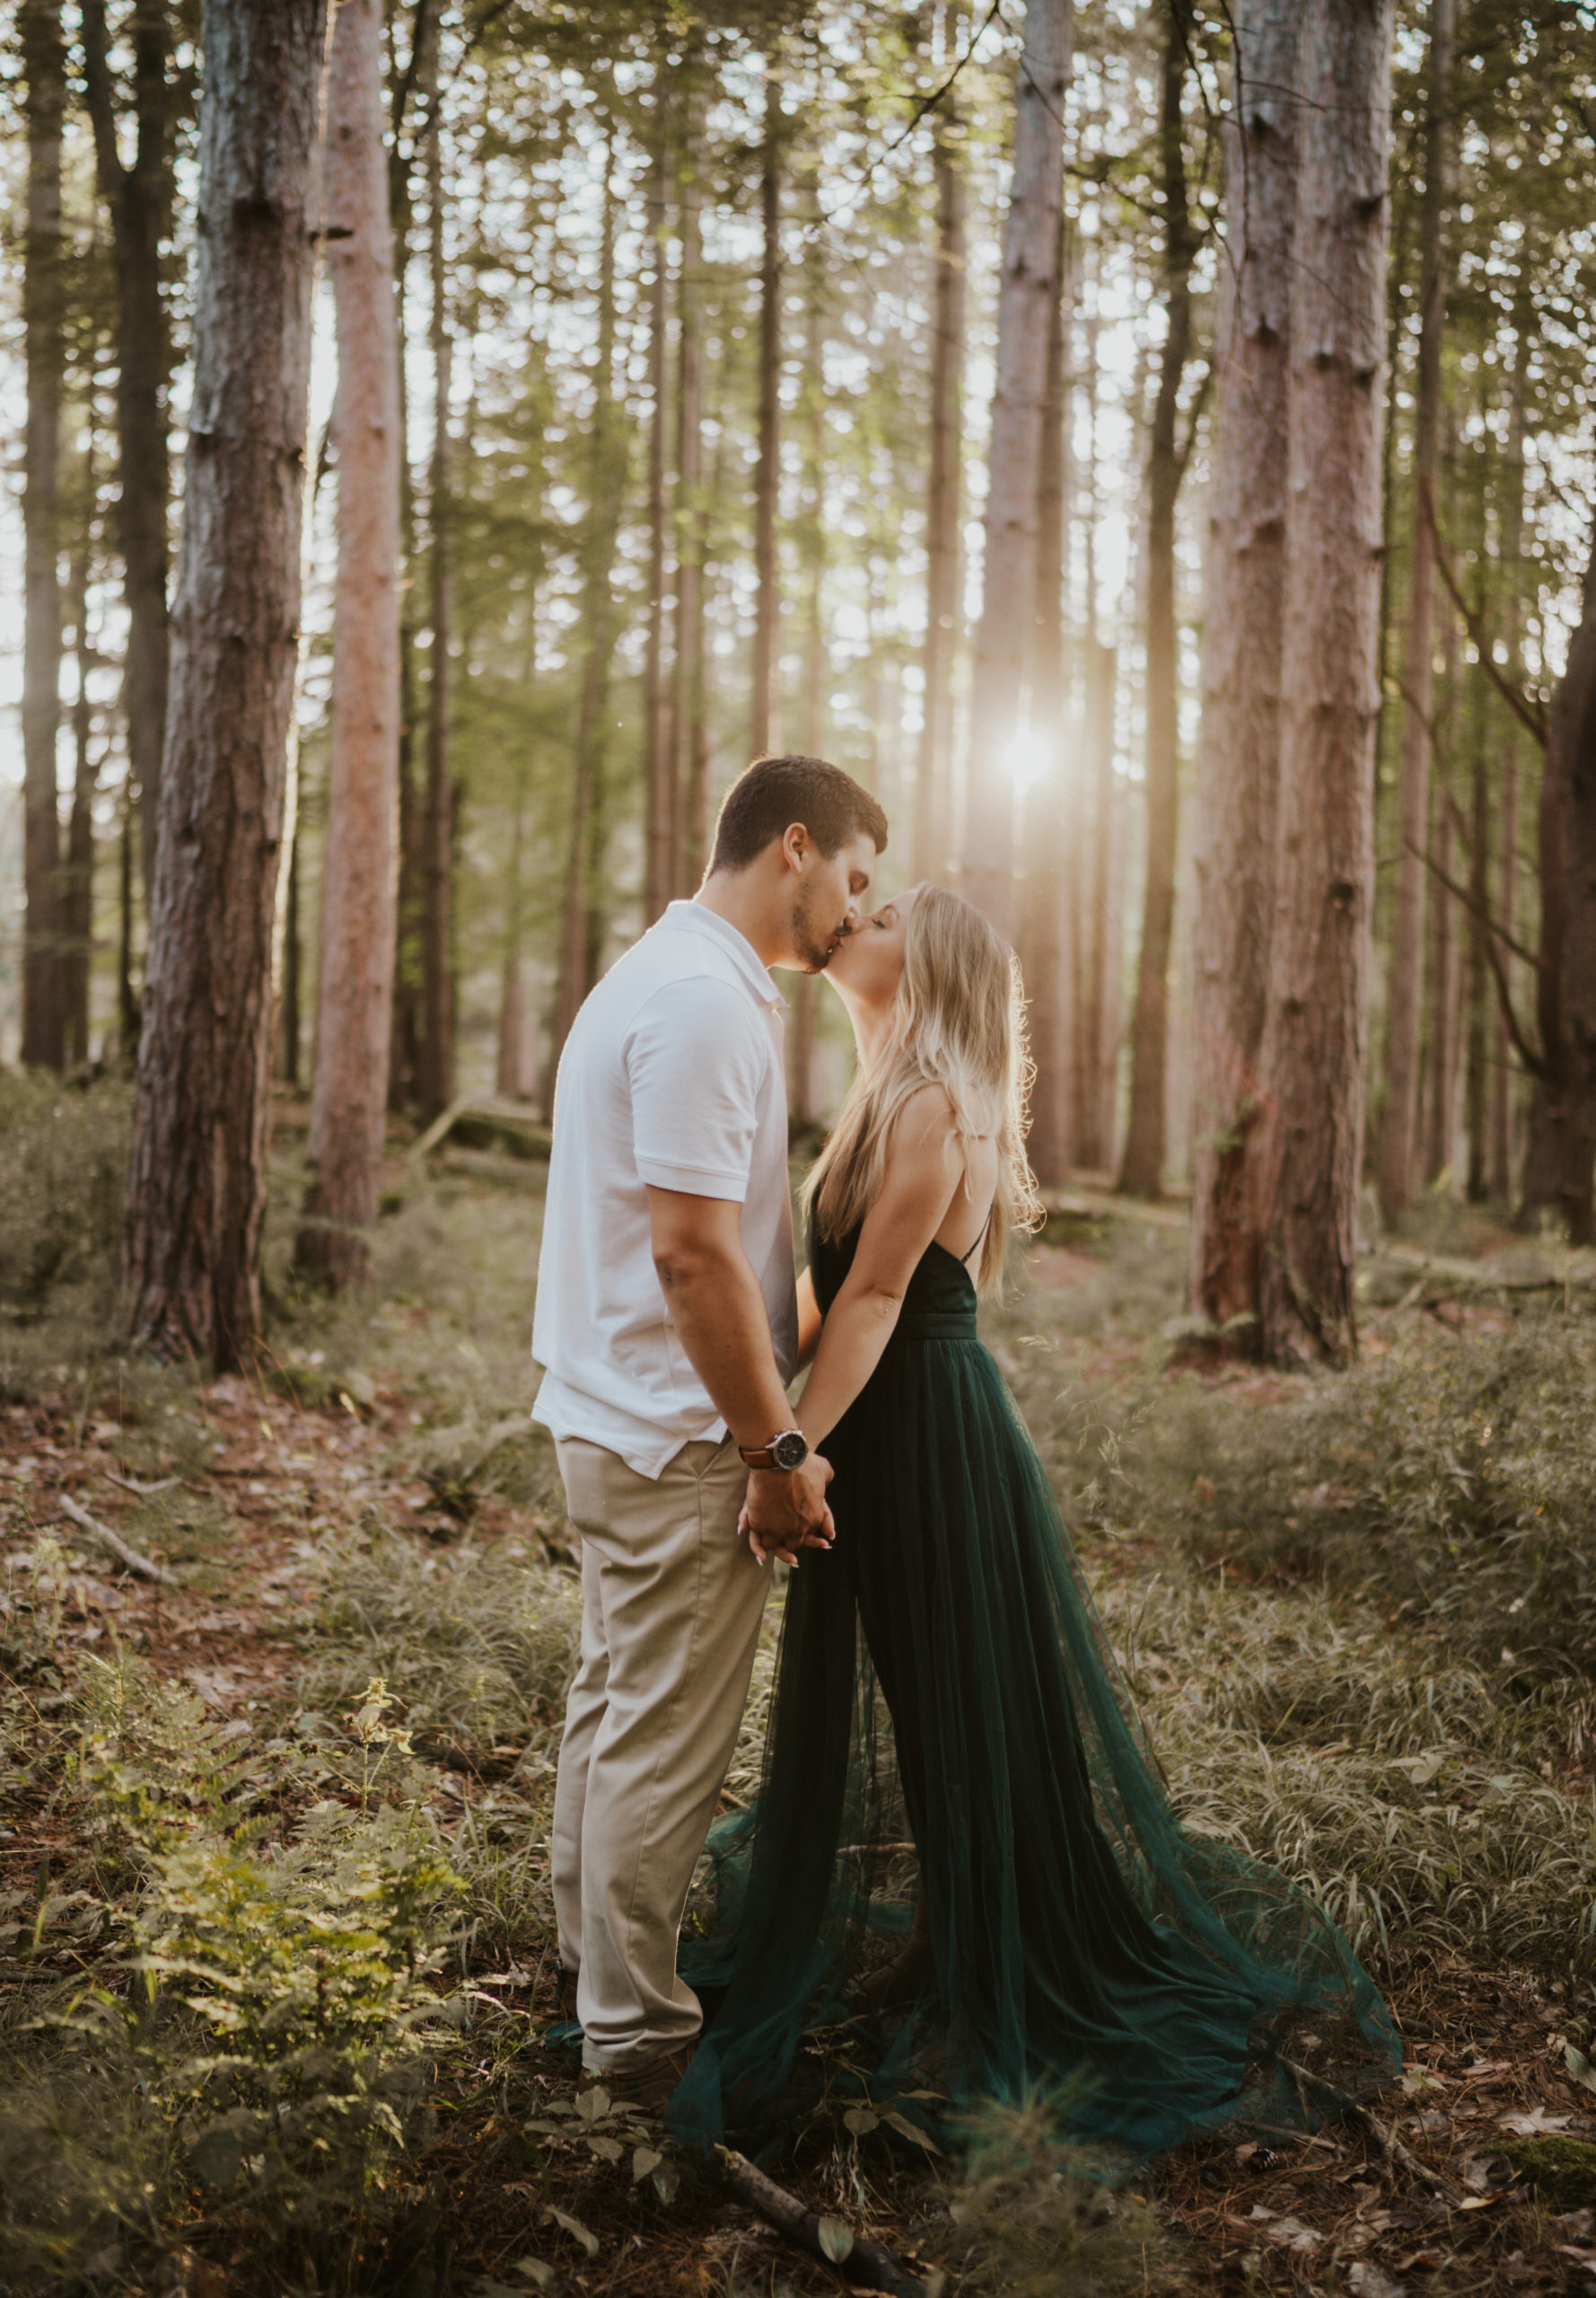 Engagement session at letchworth state park during golden hour